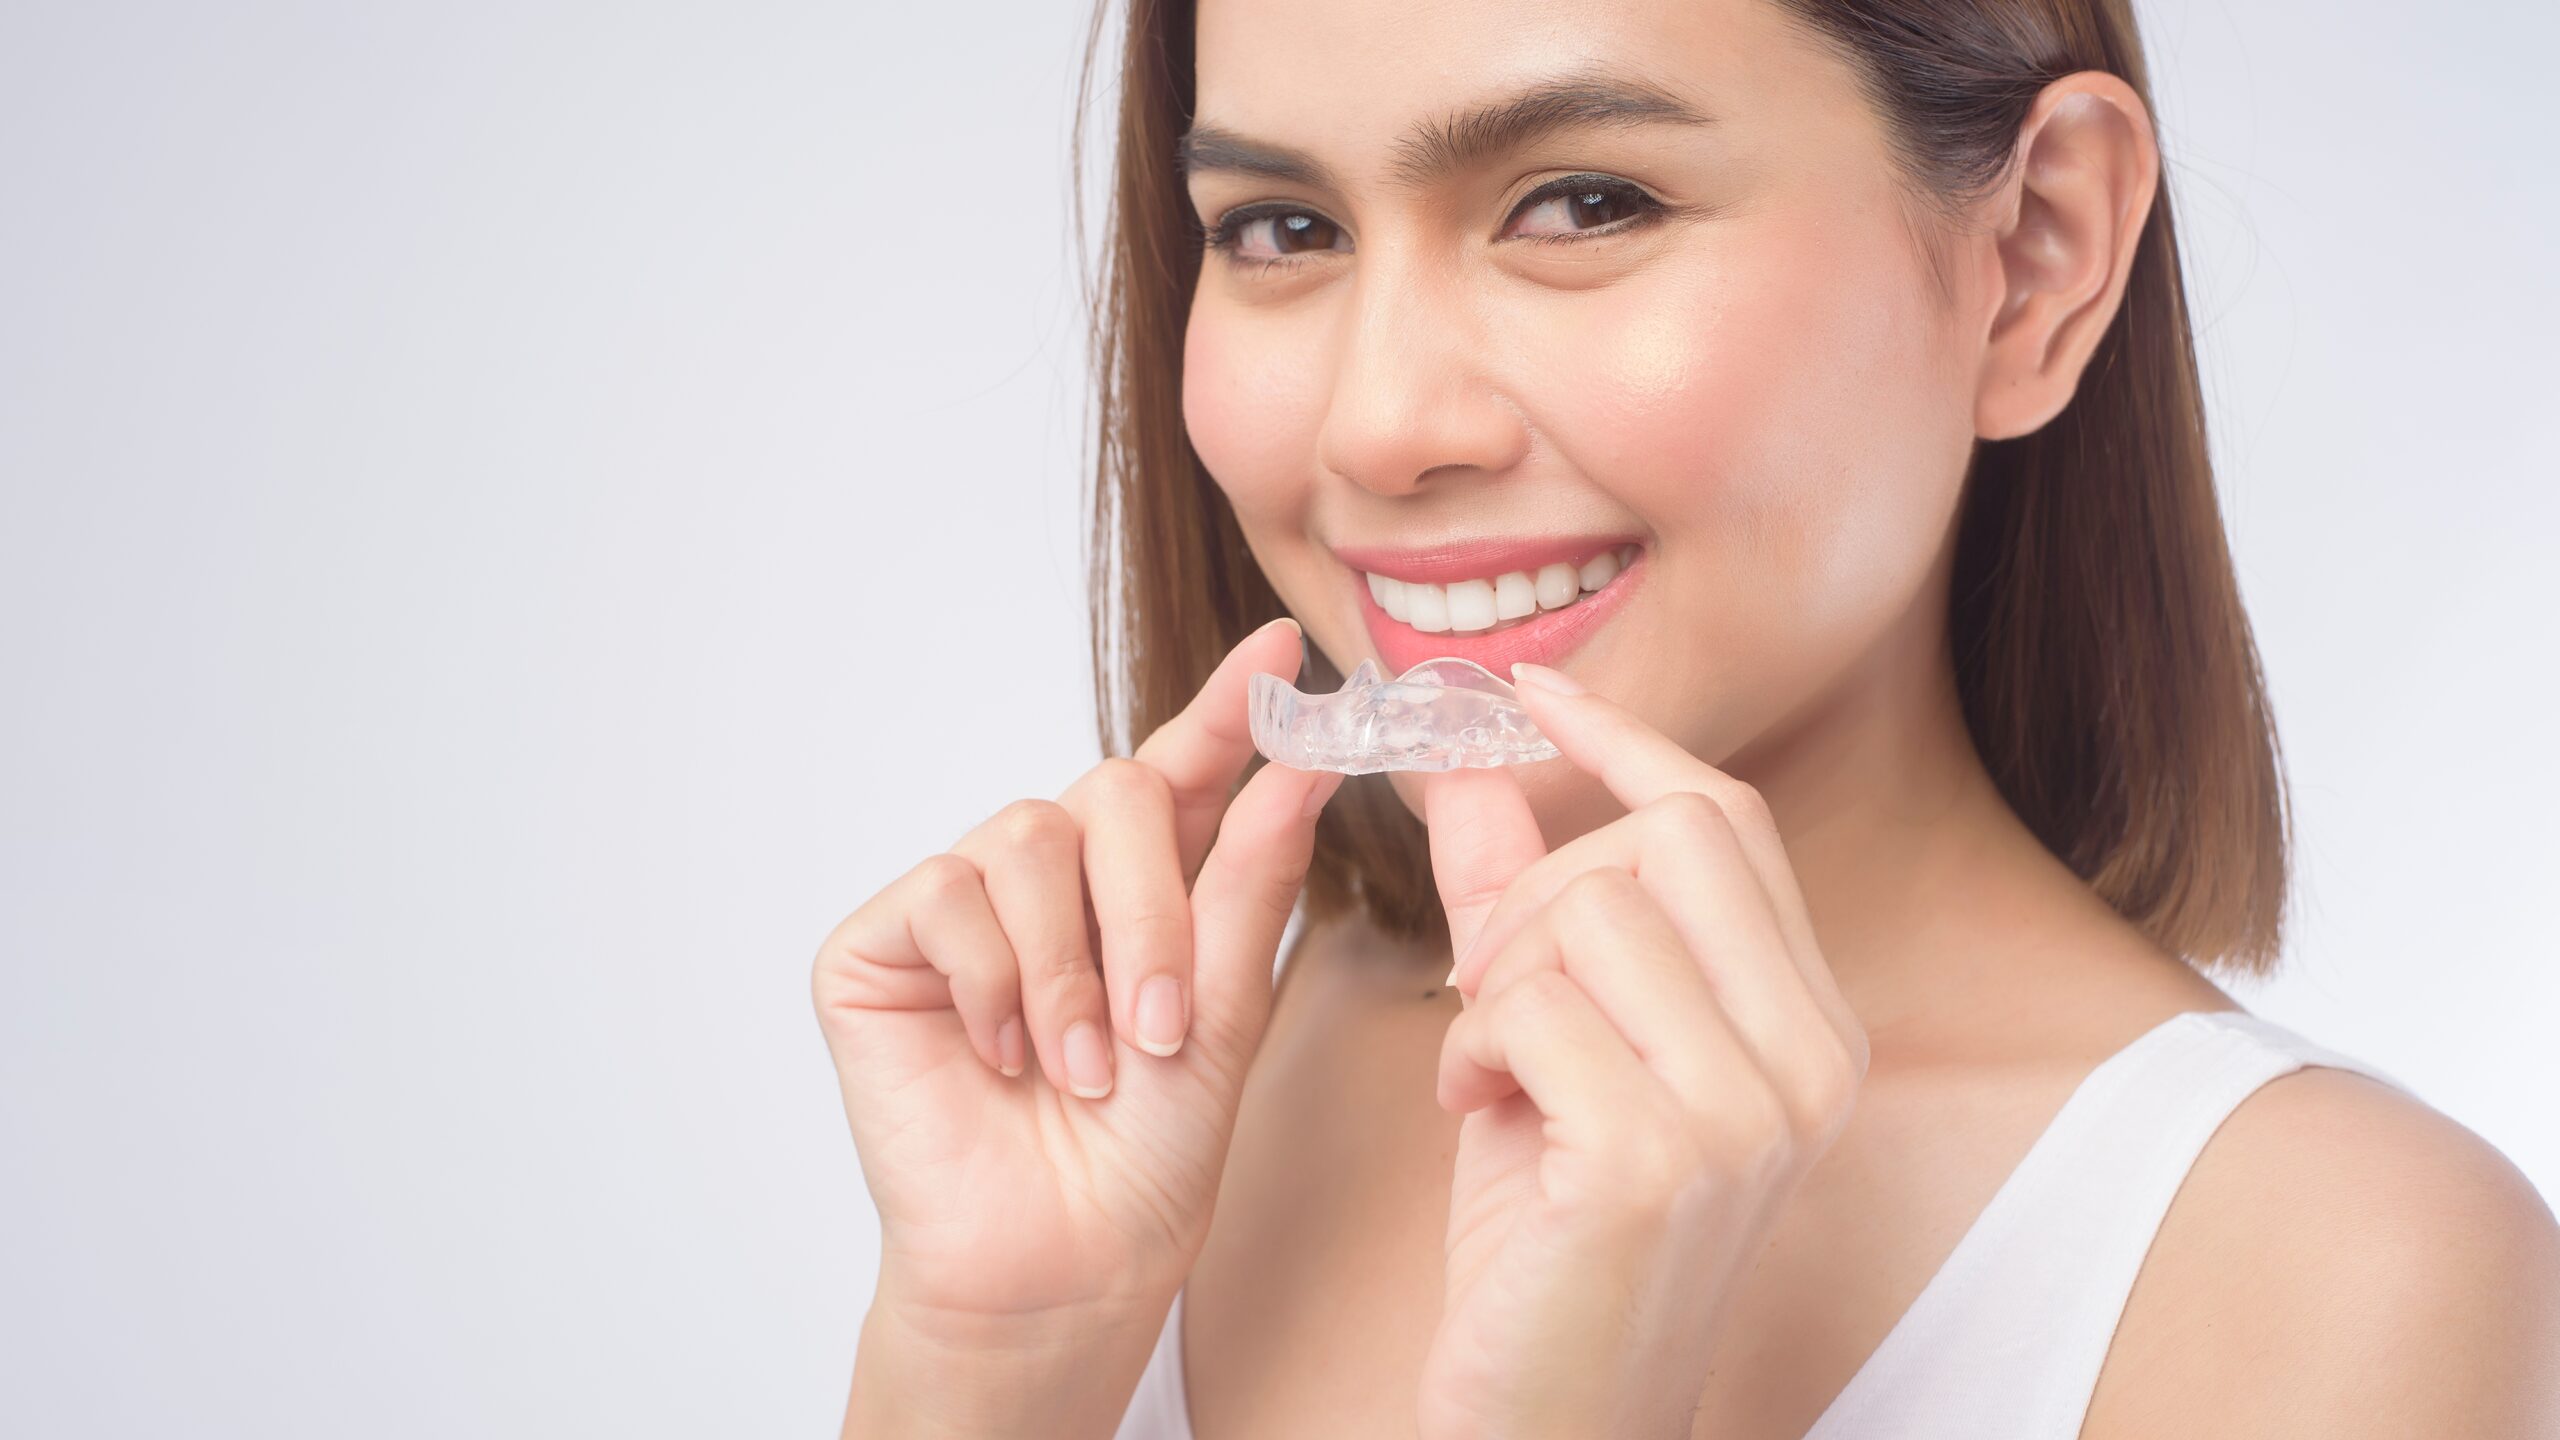 Vancouver’s Nest Dental Offers Invisalign® For Straight, Healthy Teeth